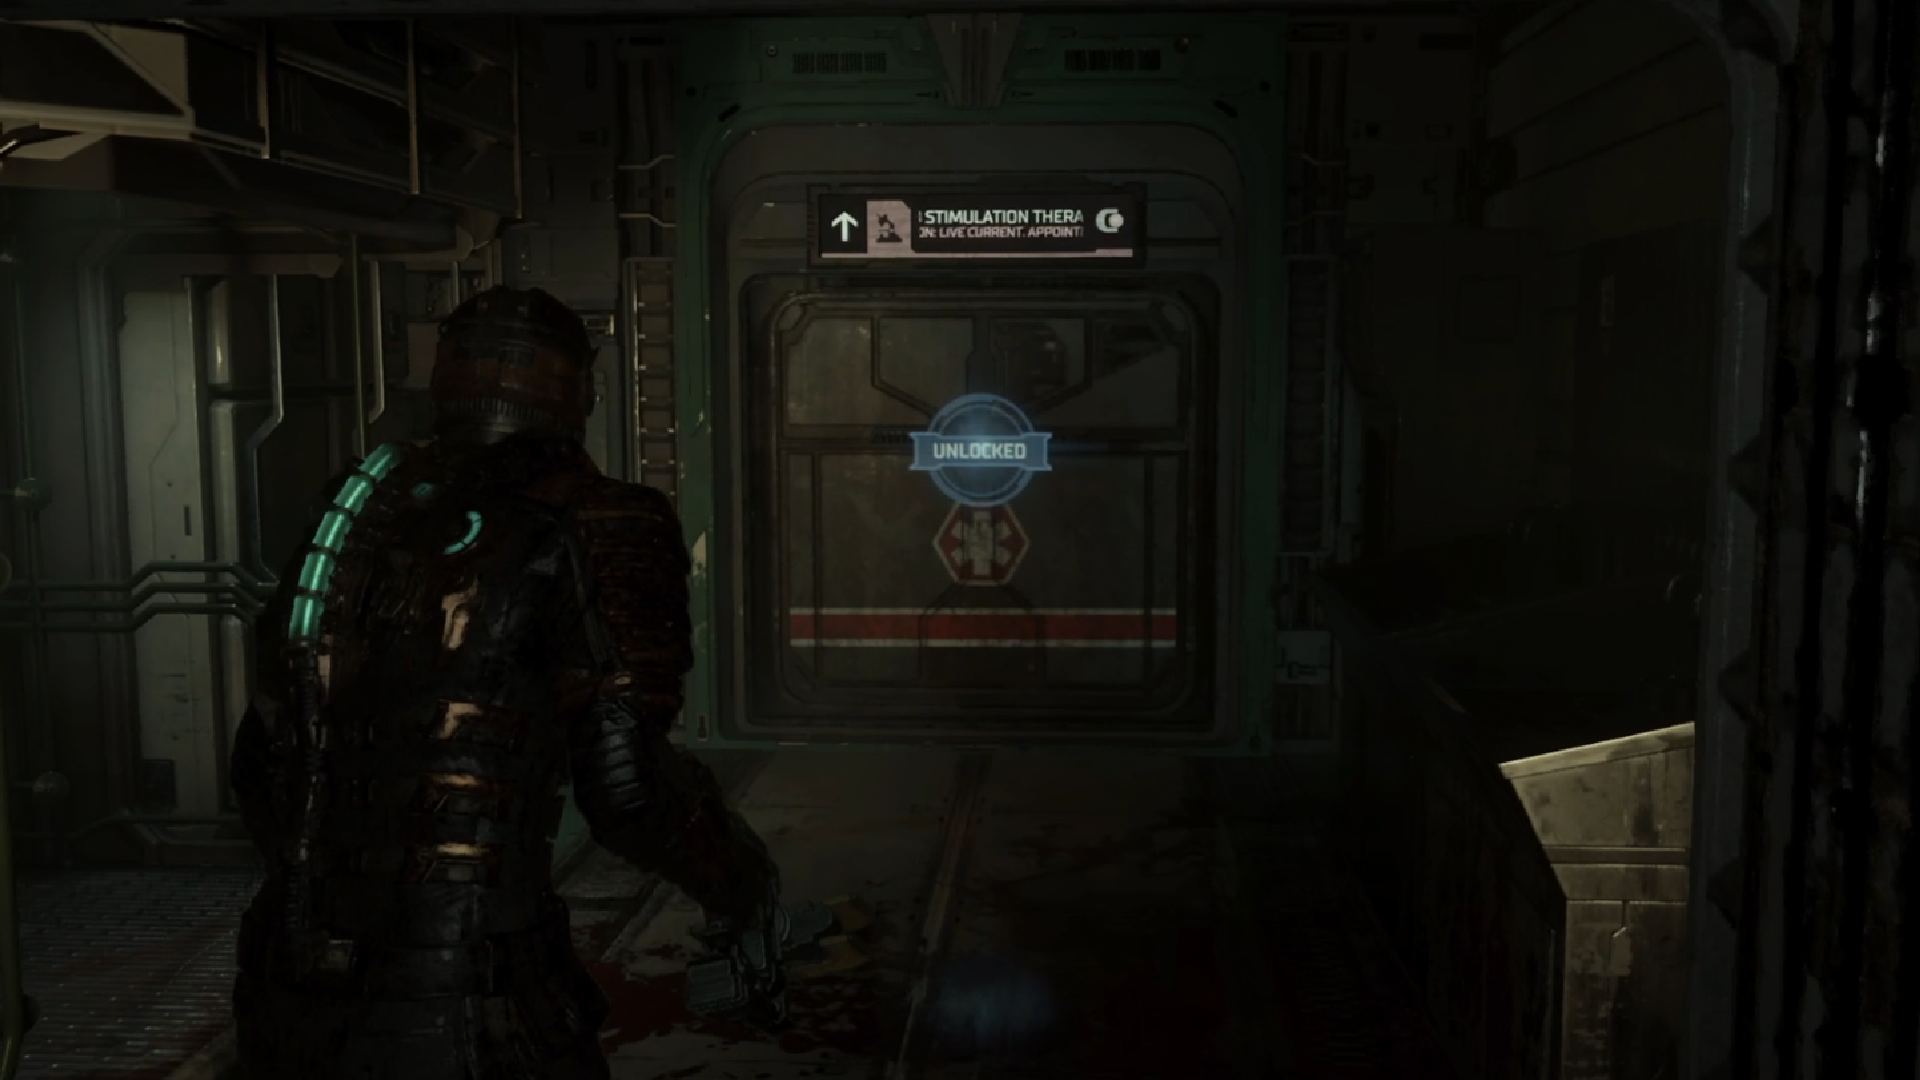 Dead Space Nodes: The node can be seen